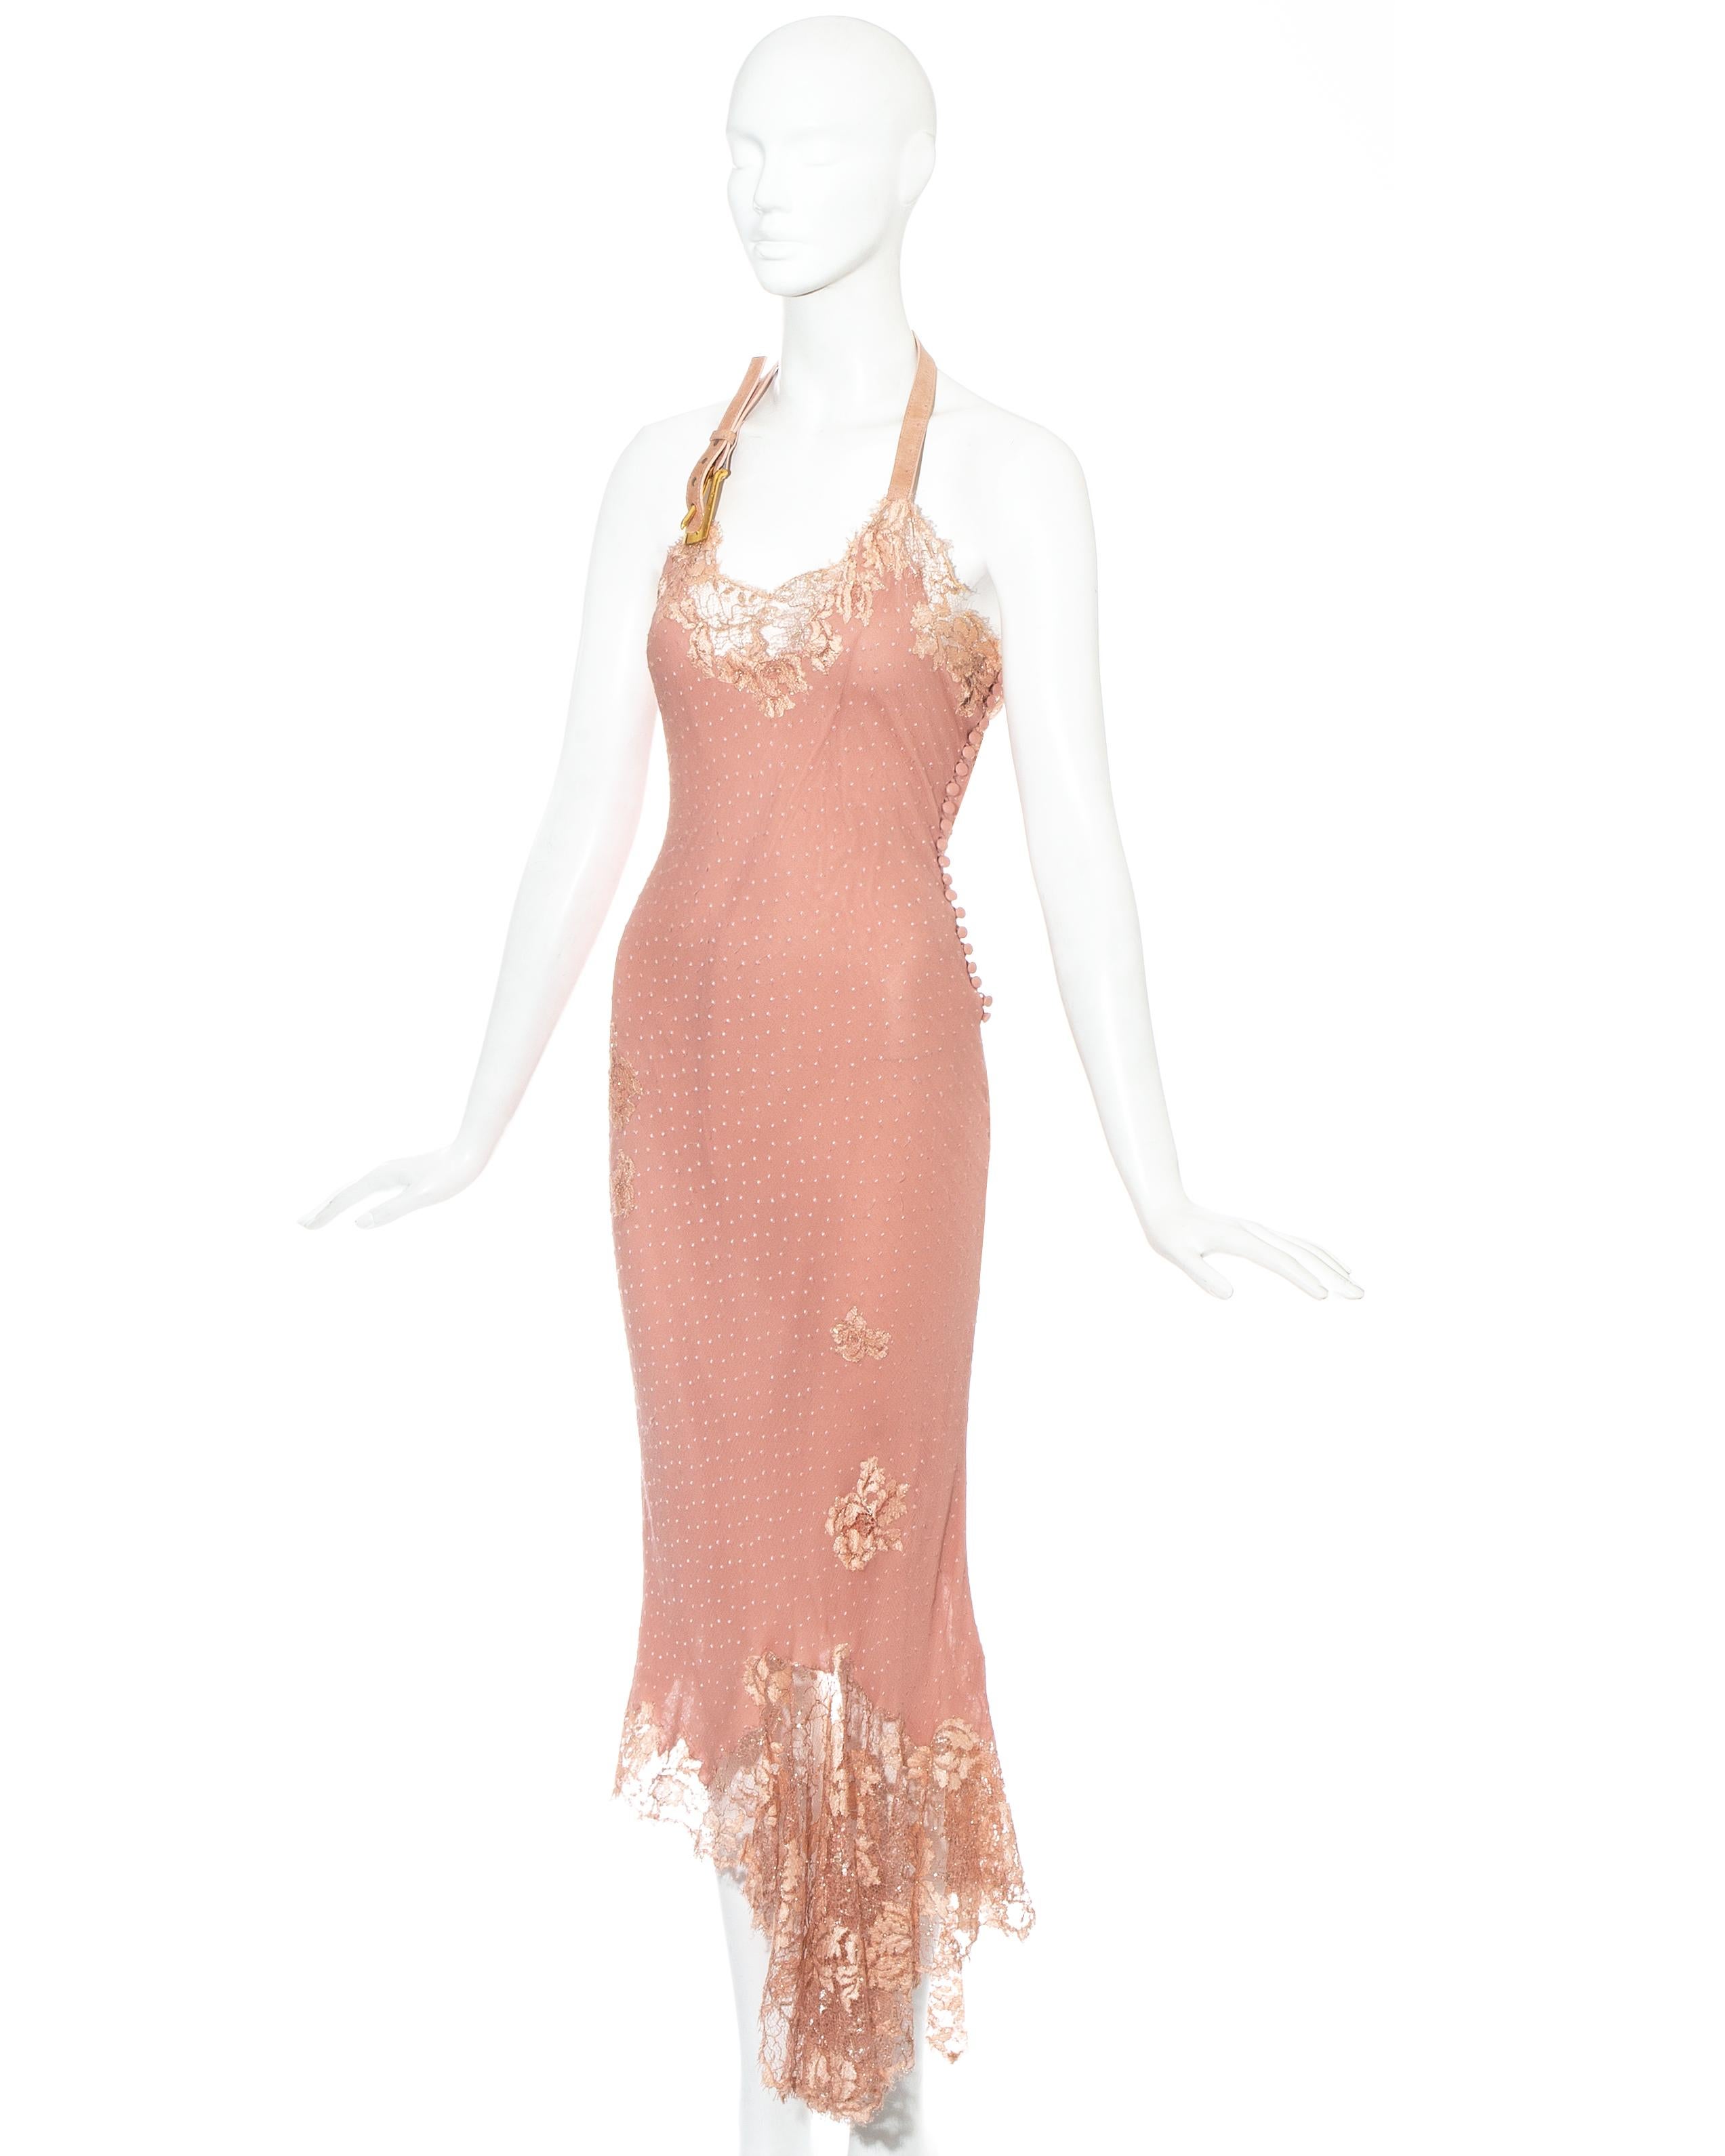 Christian Dior by John Galliano; pink lingerie inspired evening dress. Jacquard silk chiffon with metallic lace. Lambskin leather halter with large gold buckle fastening. 21 fabric button fastenings on side seam. Low back with drapery above